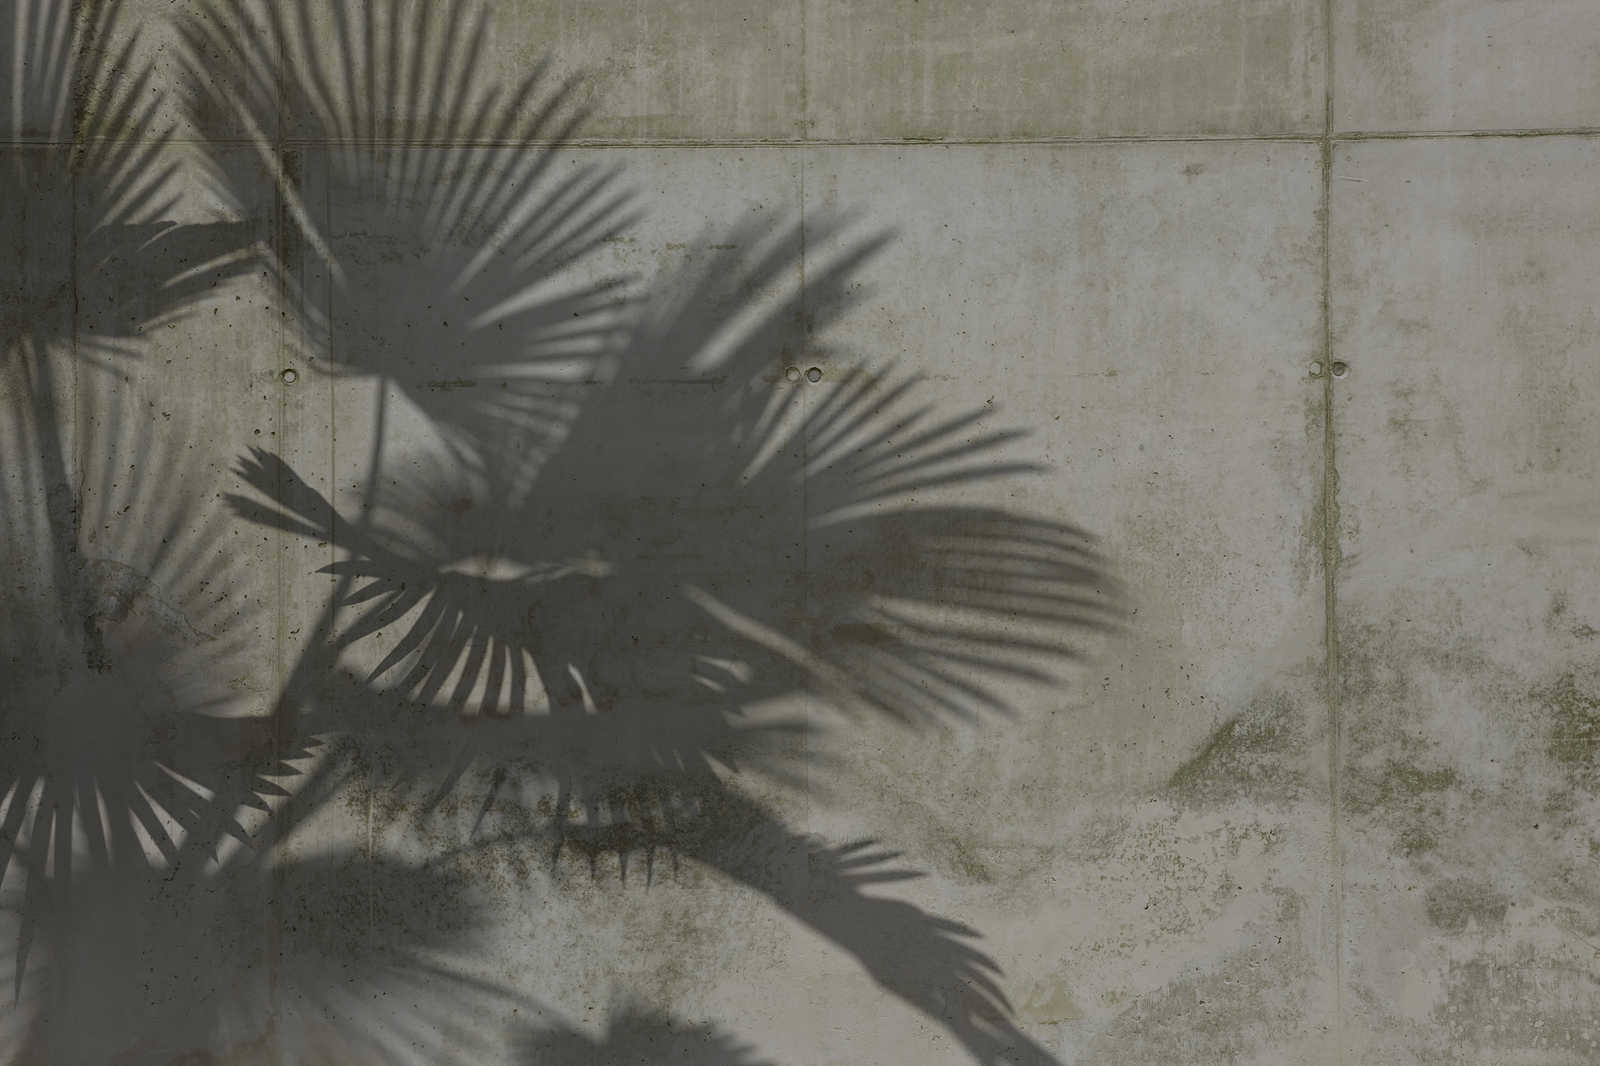             Canvas painting Shadows of palm leaves on concrete wall - 0,90 m x 0,60 m
        